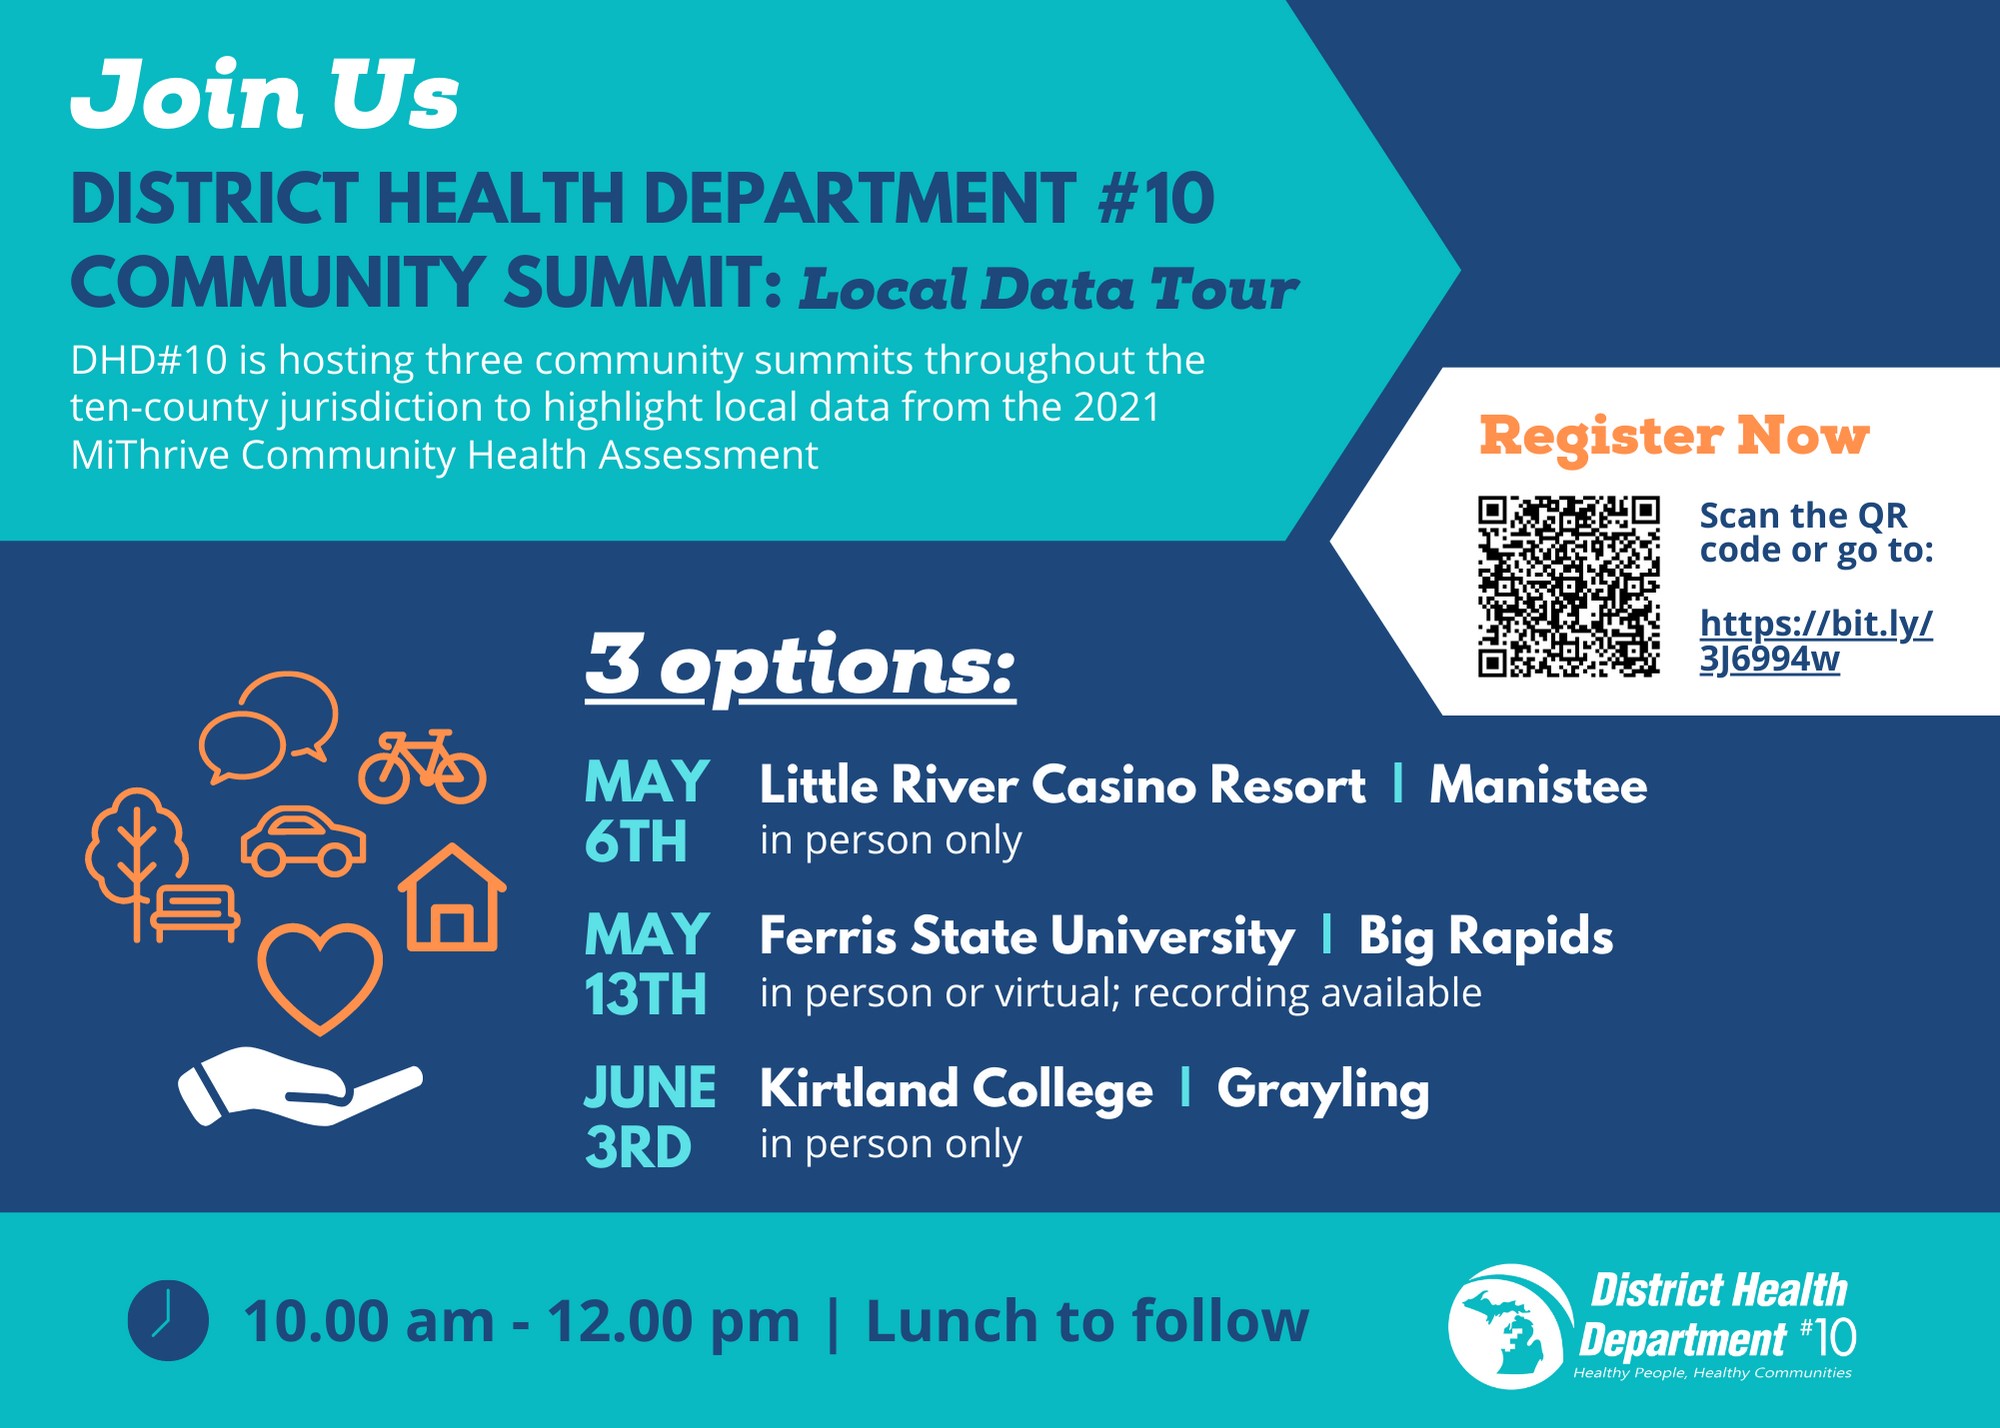 Health department planning local data tour at Ferris State